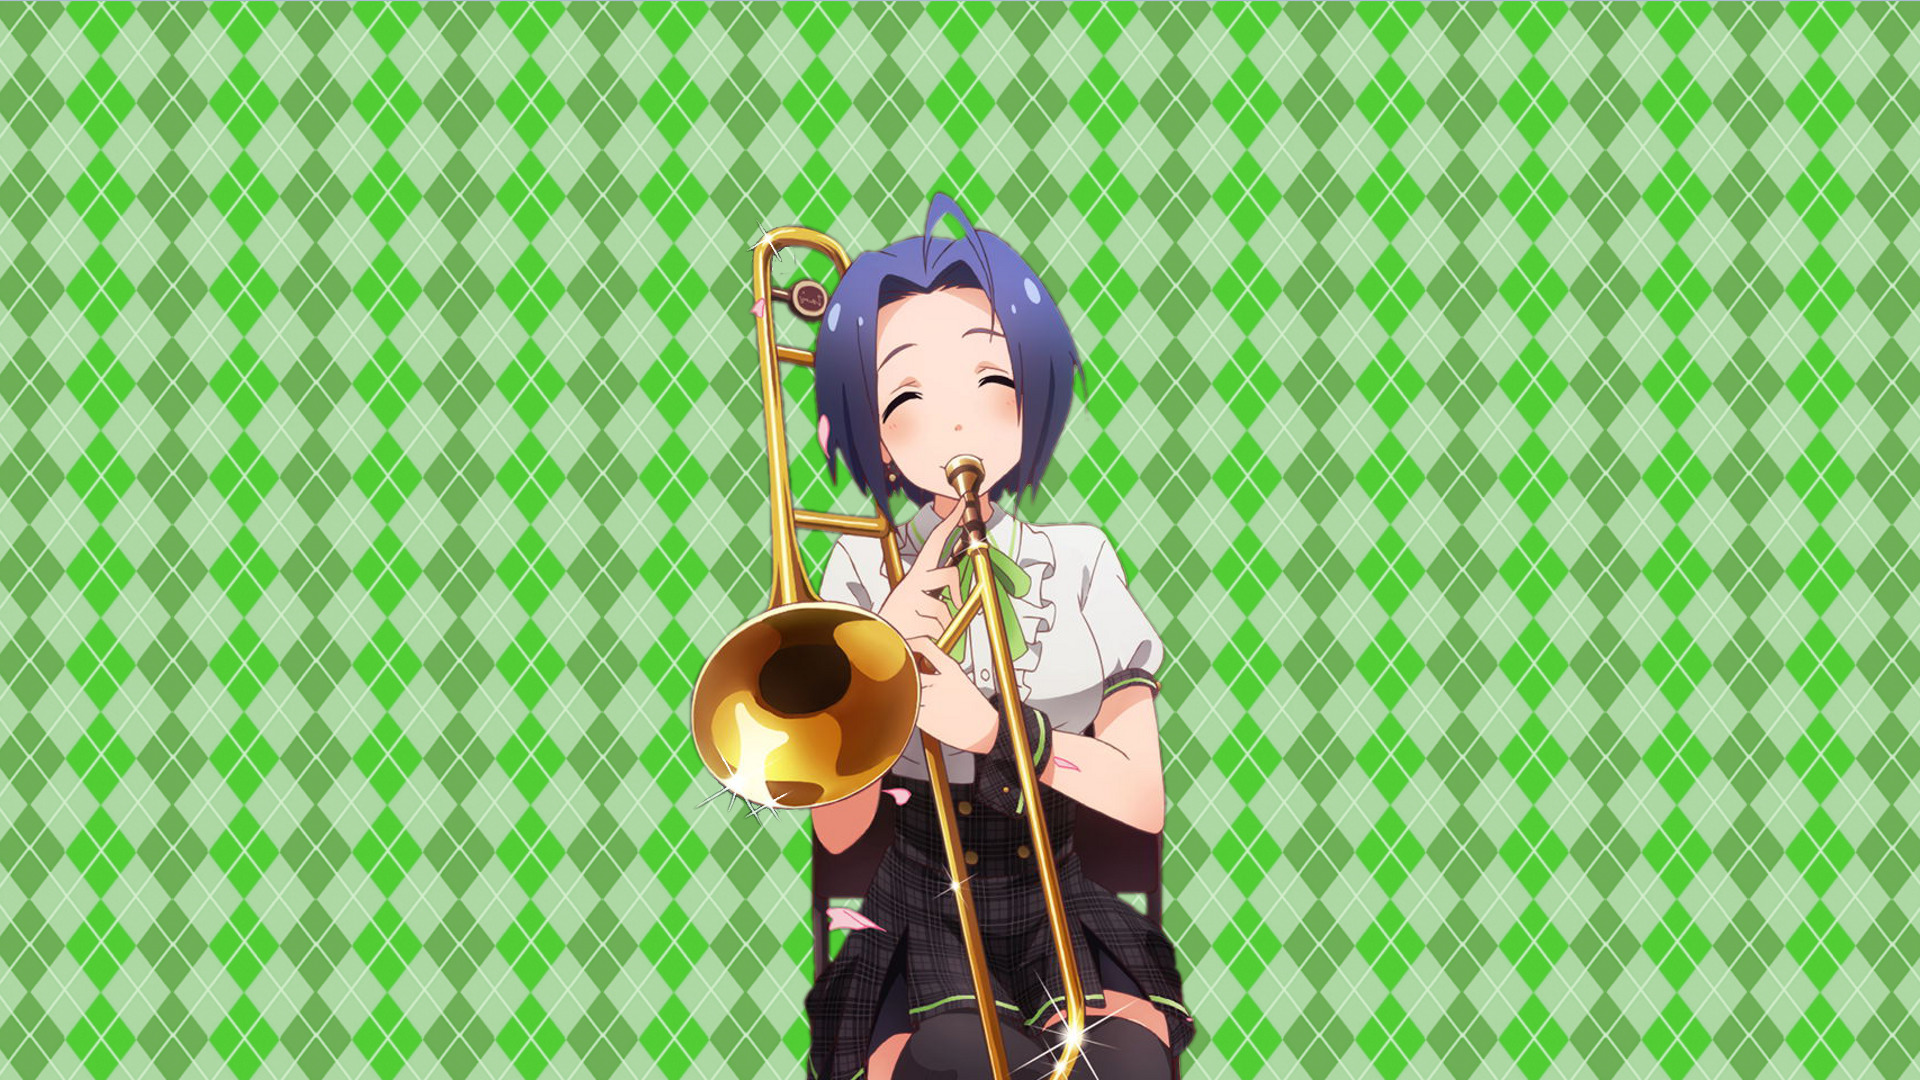 music, Orchestra, Anime Girls, THE IDOLM@STER Wallpaper